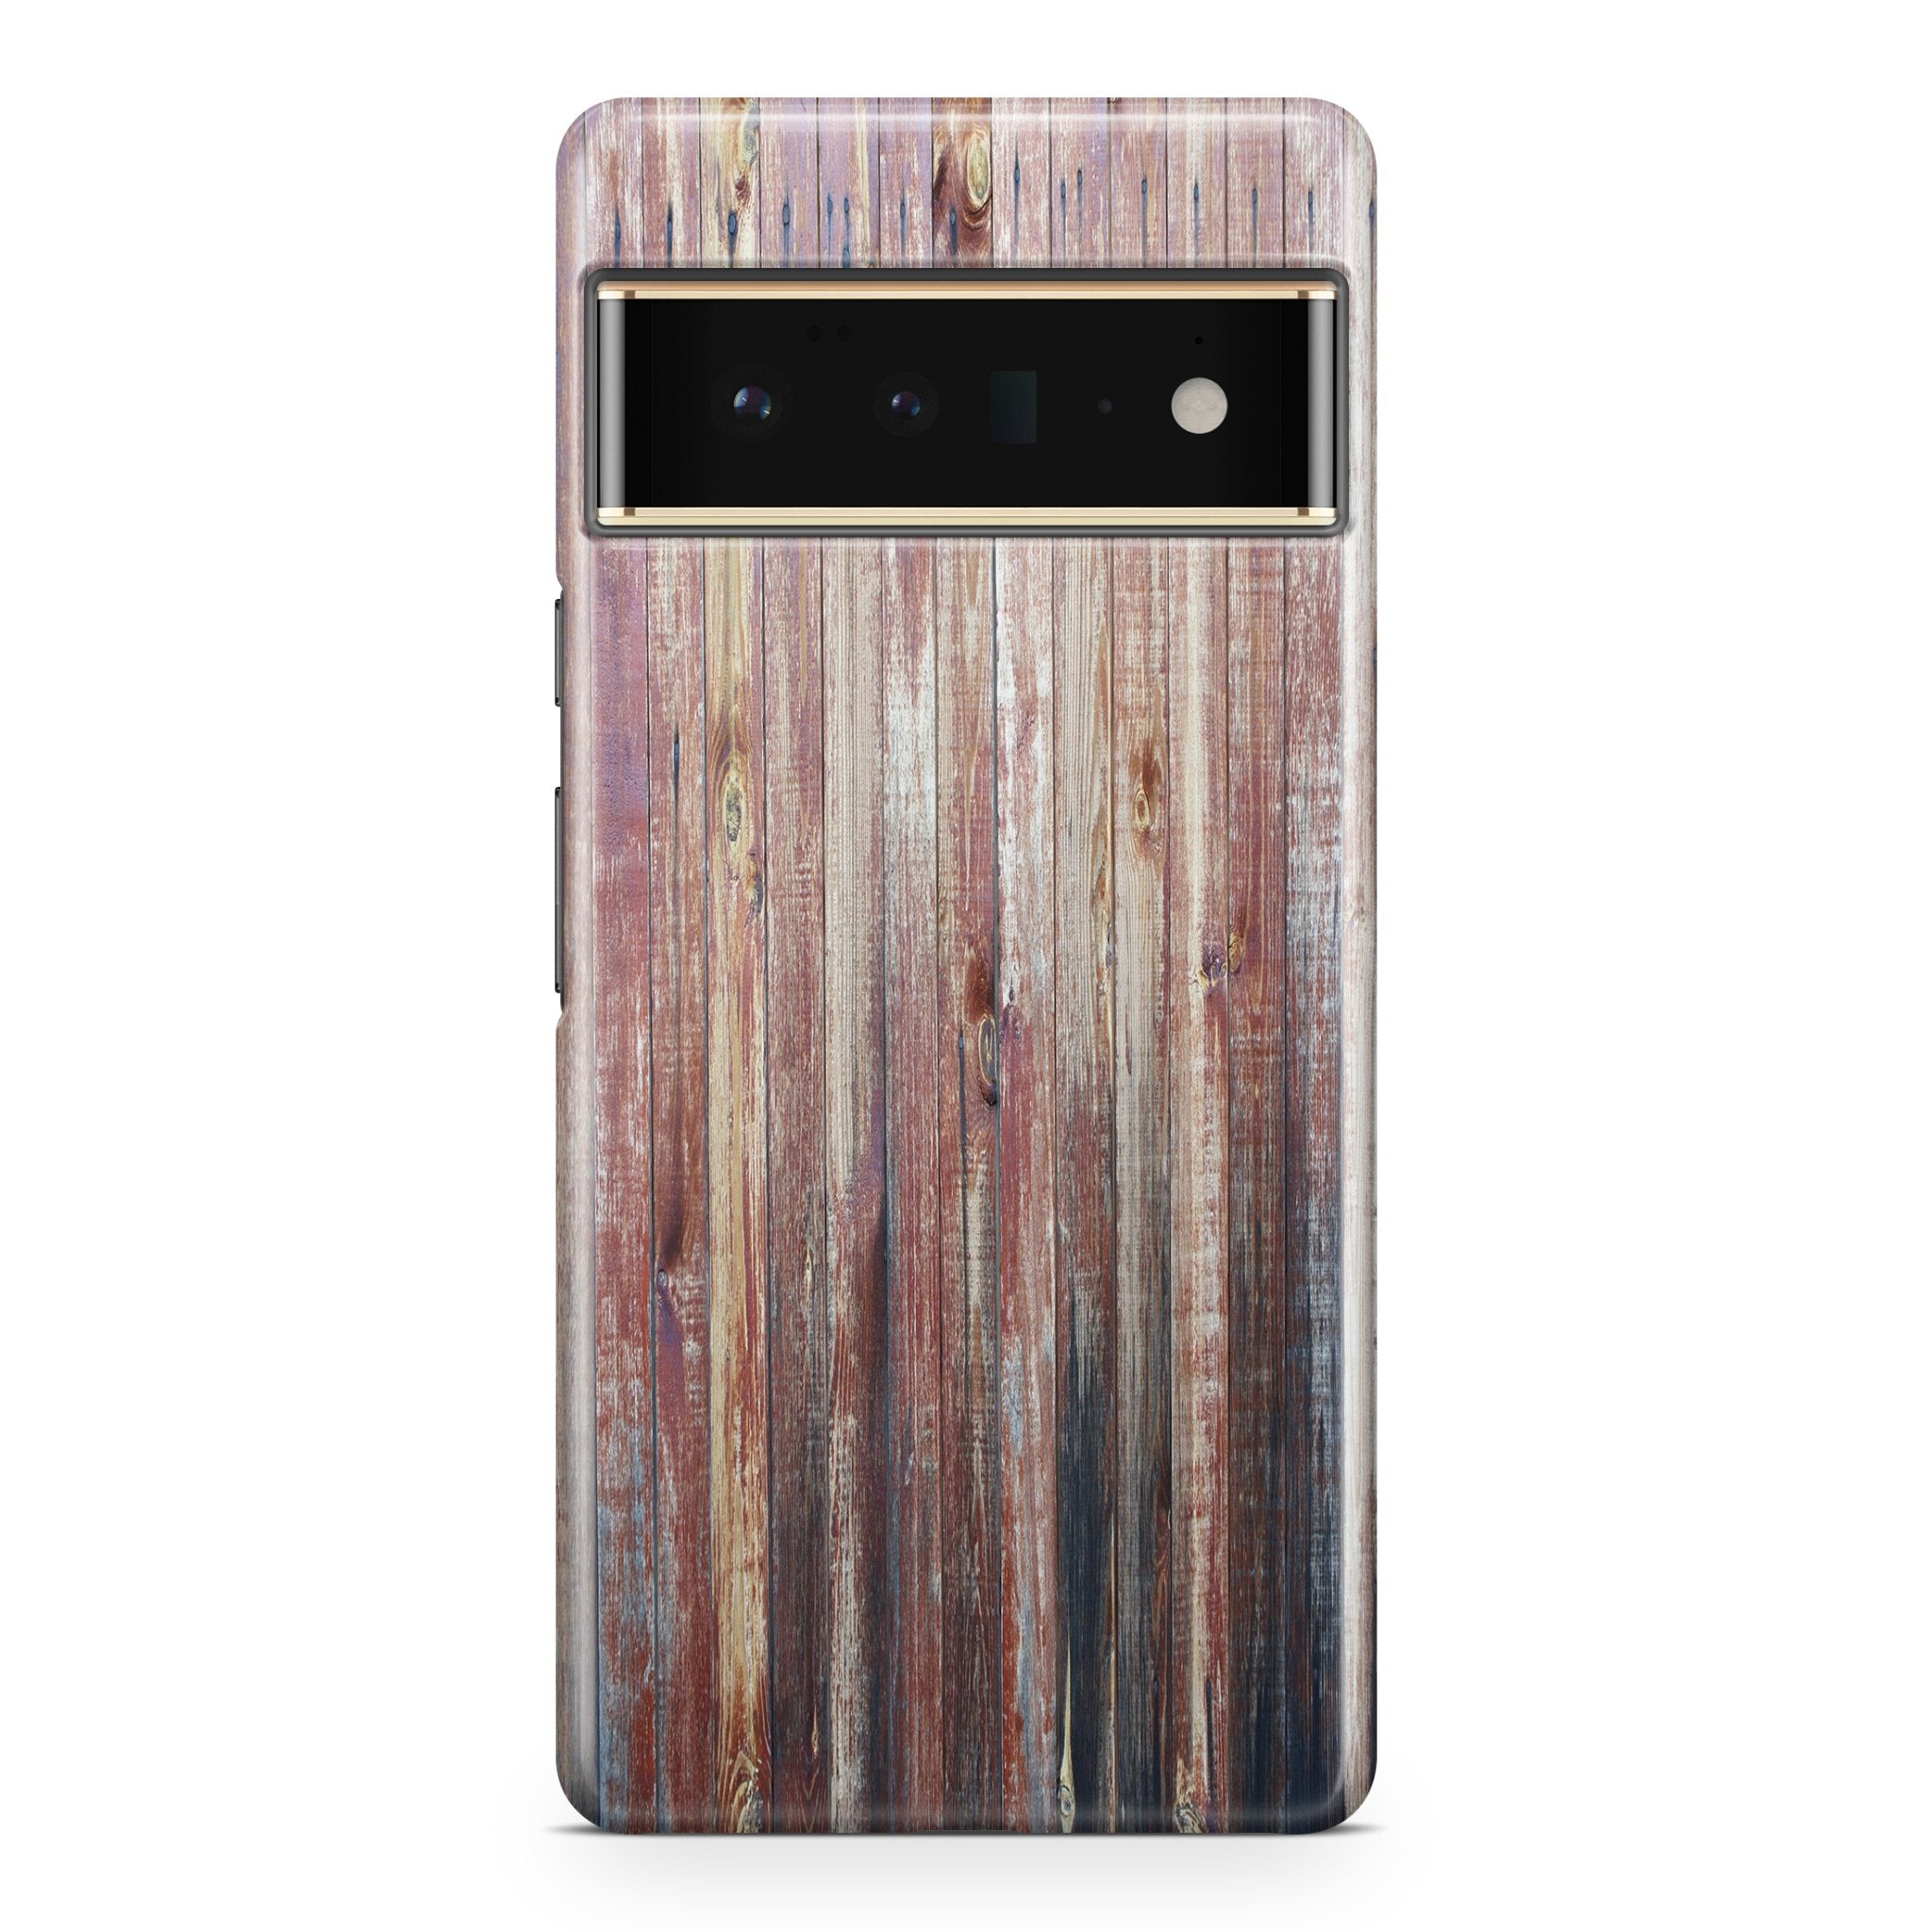 Vintage Stressed Boards - Google phone case designs by CaseSwagger